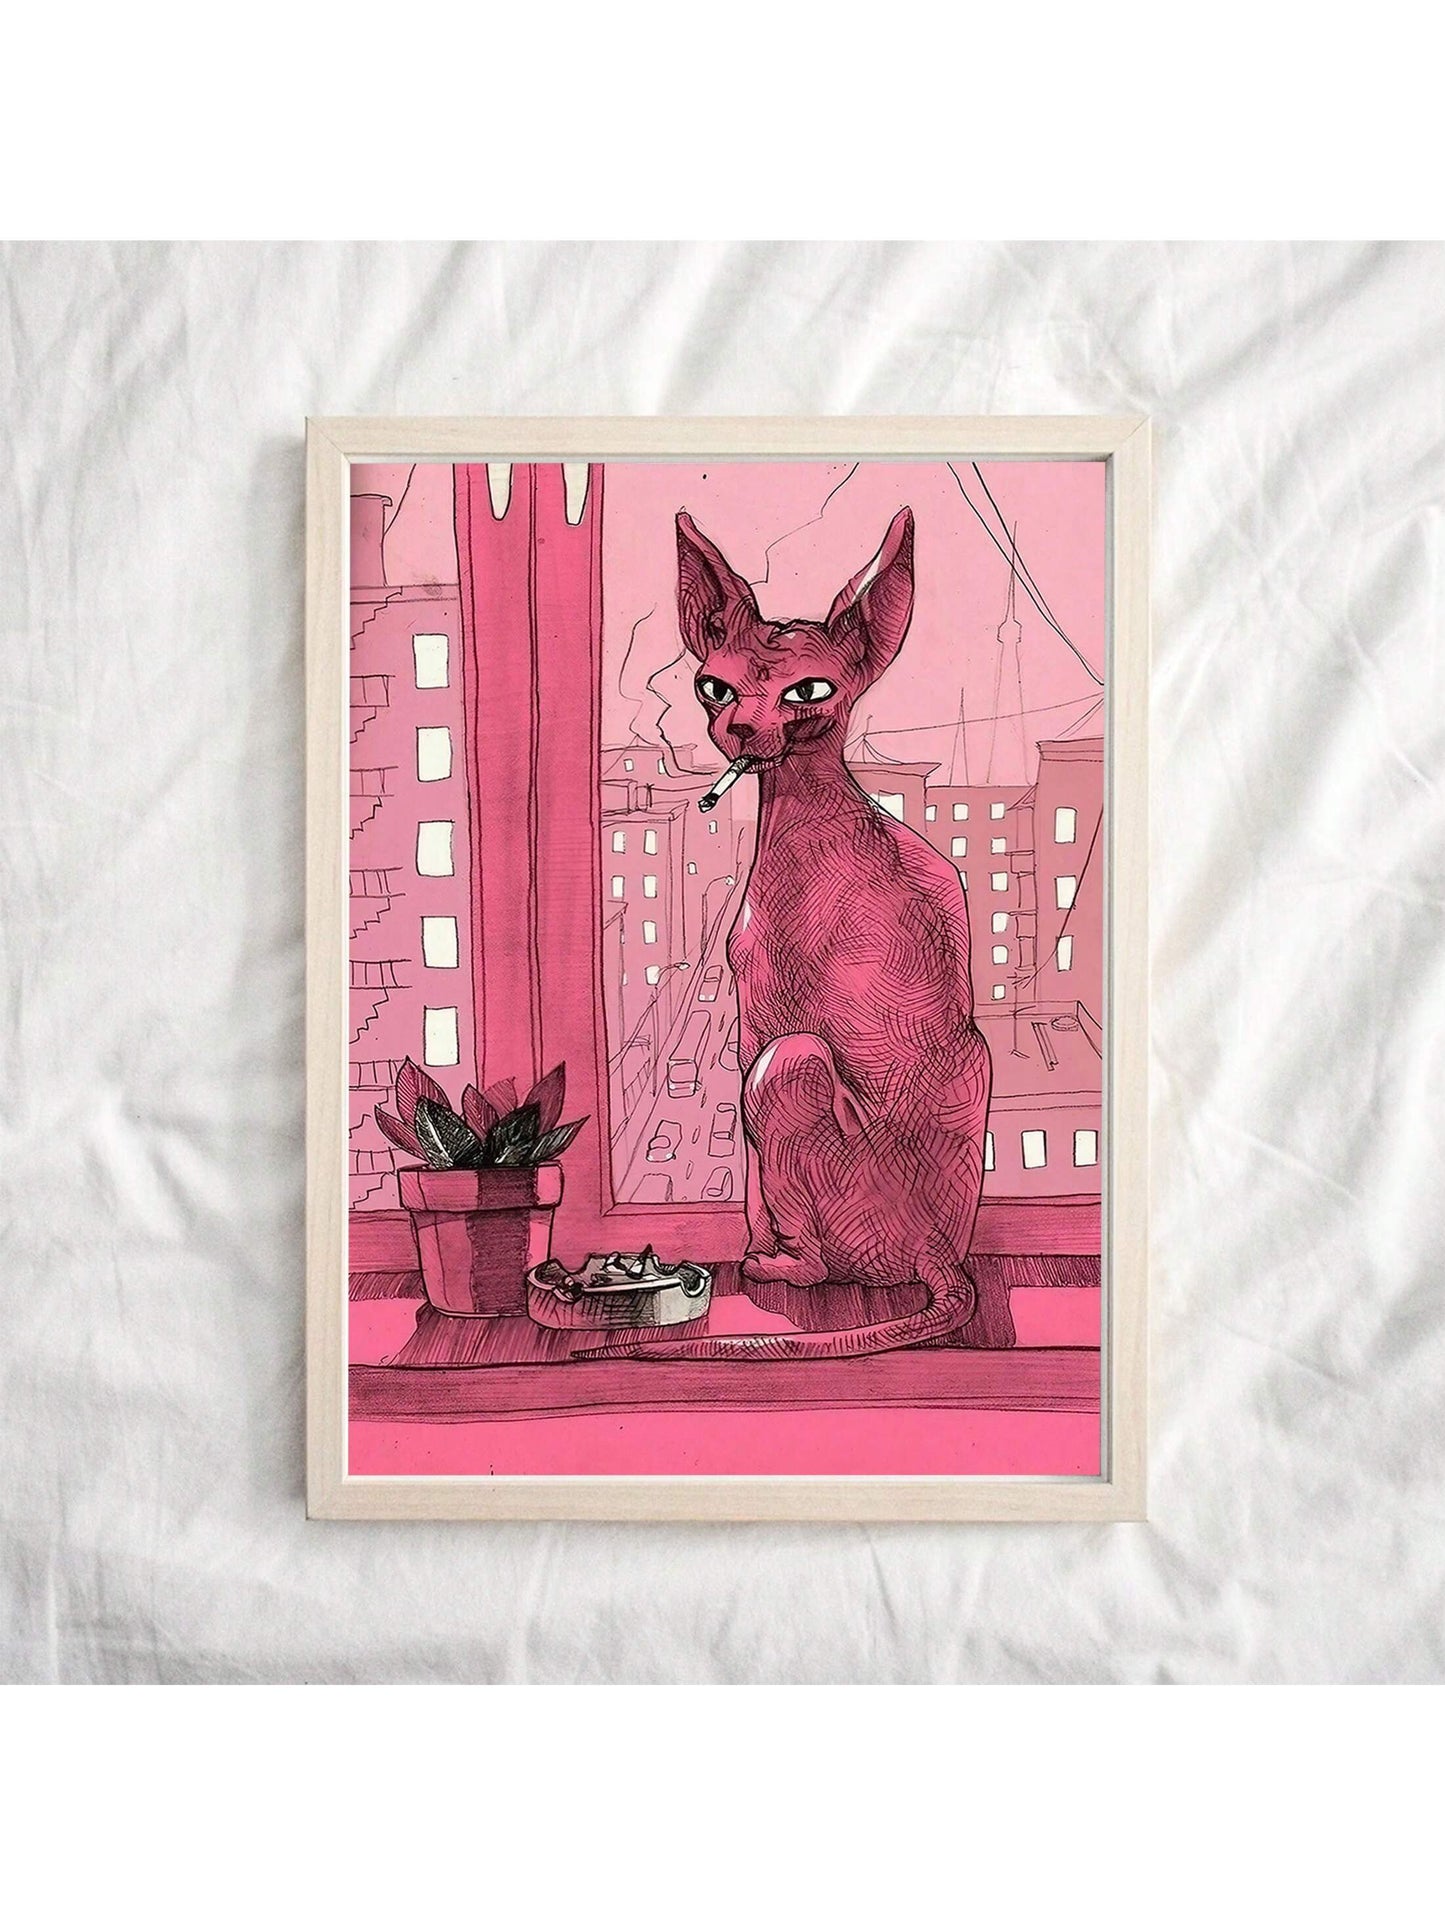 A Drawing Of A Cat On A Window Ledge In Front Of A City - Canvas Art